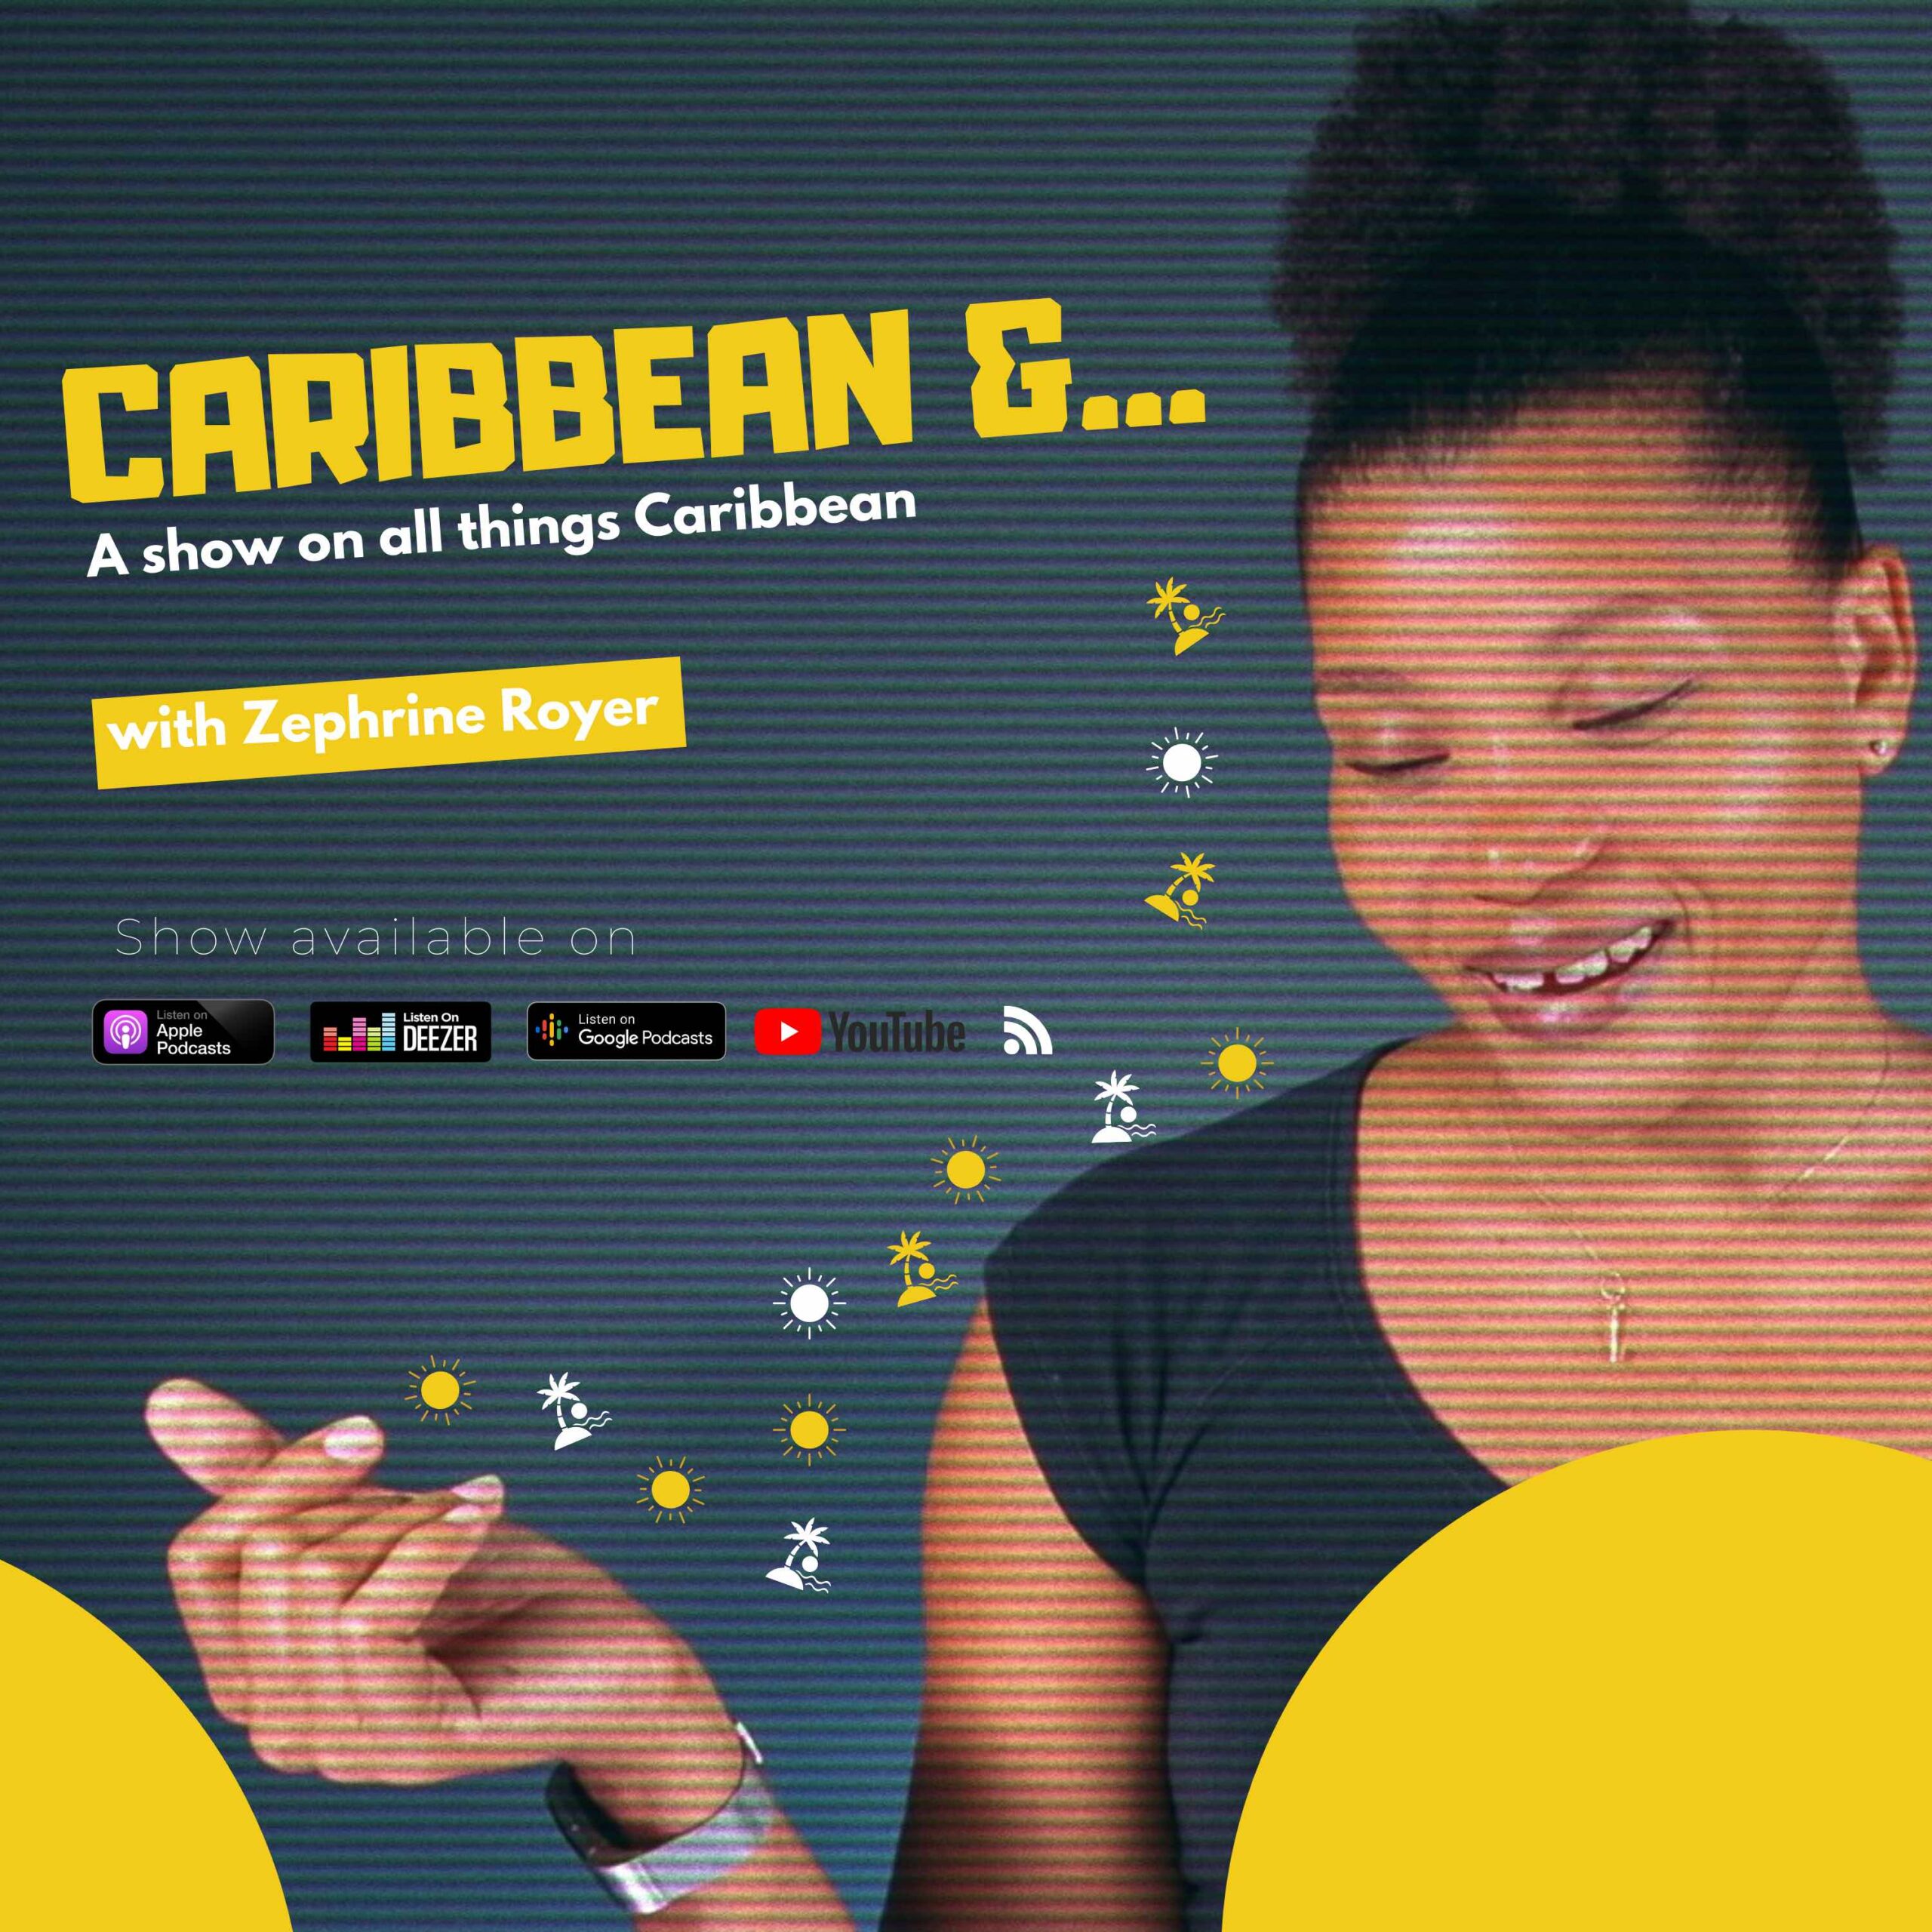 Caribbean-...-show-covers-3